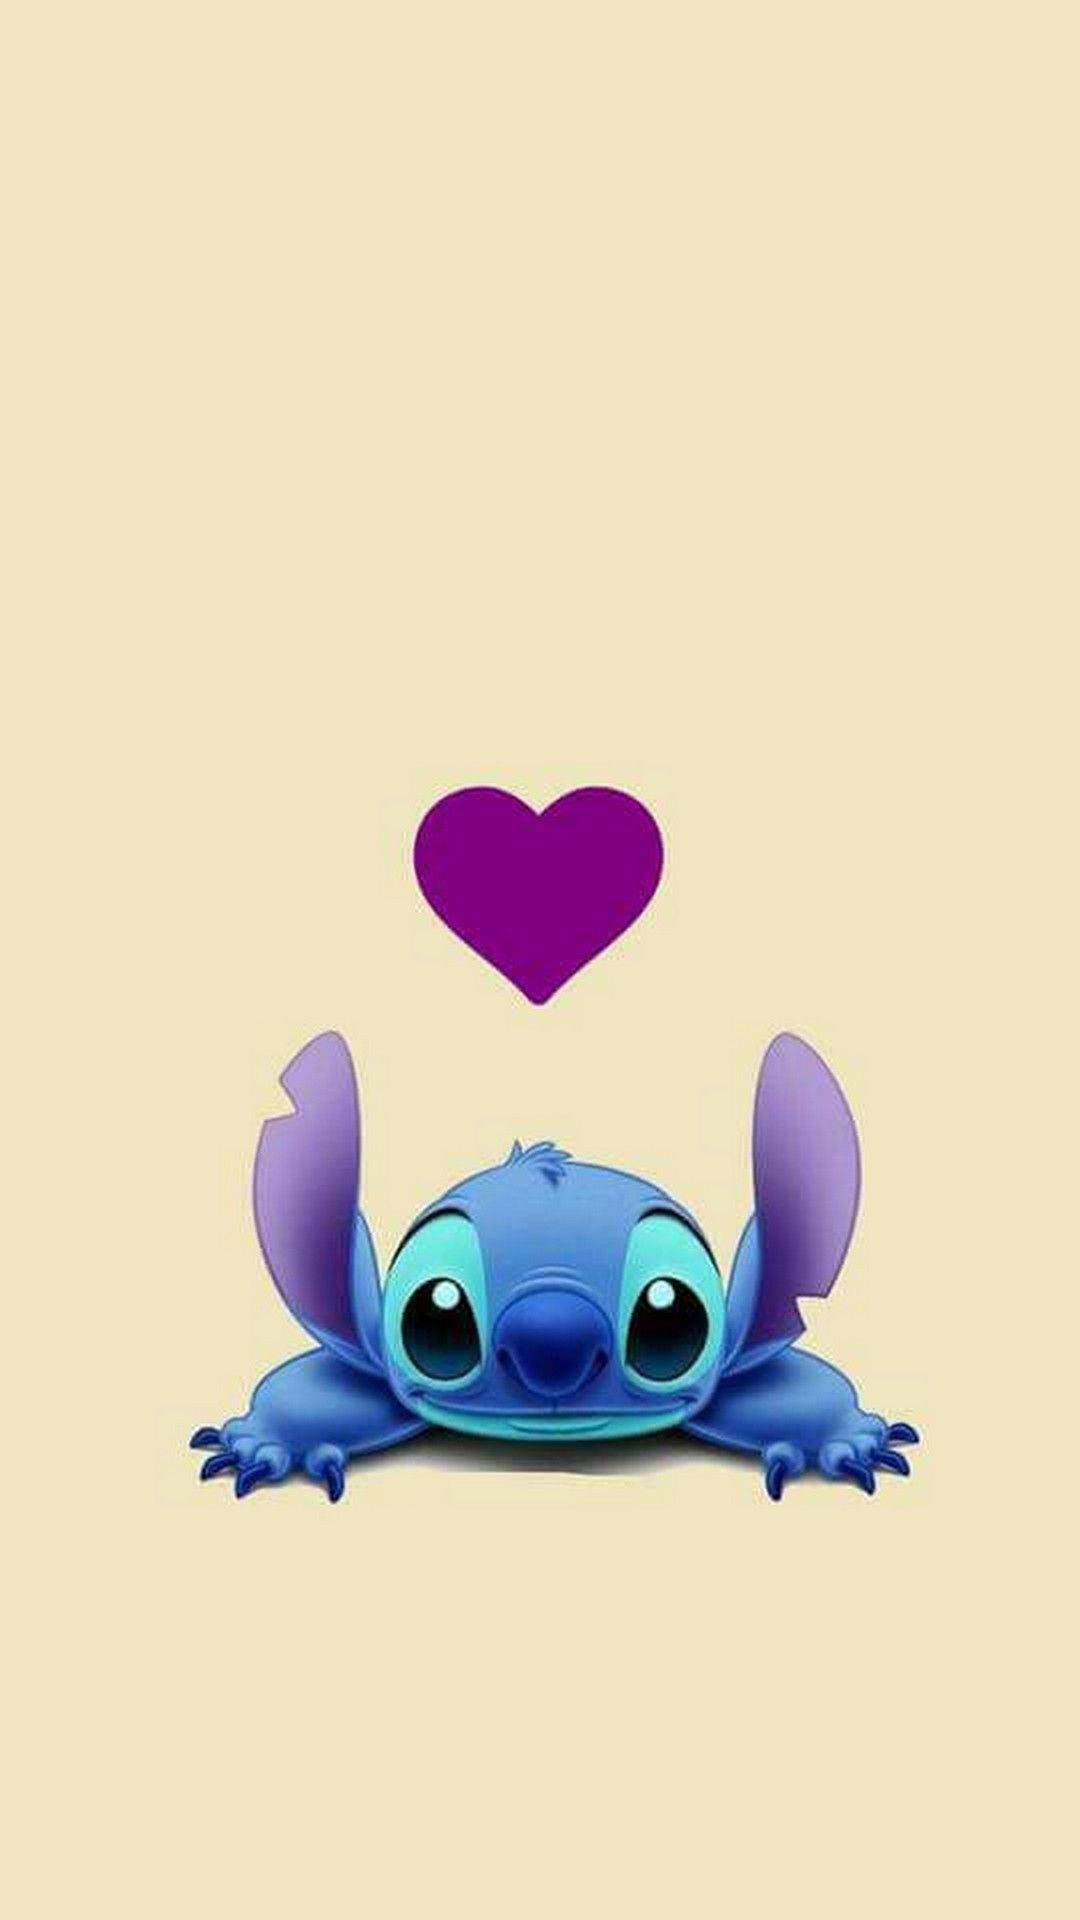 Cute Aesthetic Stitch With Purple Heart Background